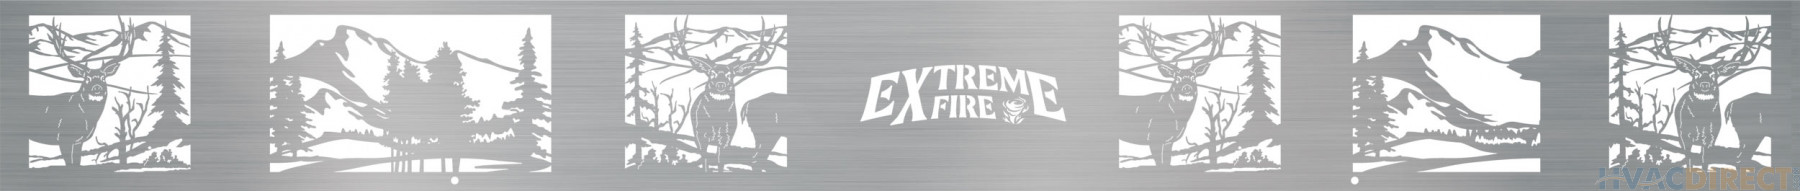 Extreme Fire “Outdoor Paradise” Steel Fire Ring - 50006